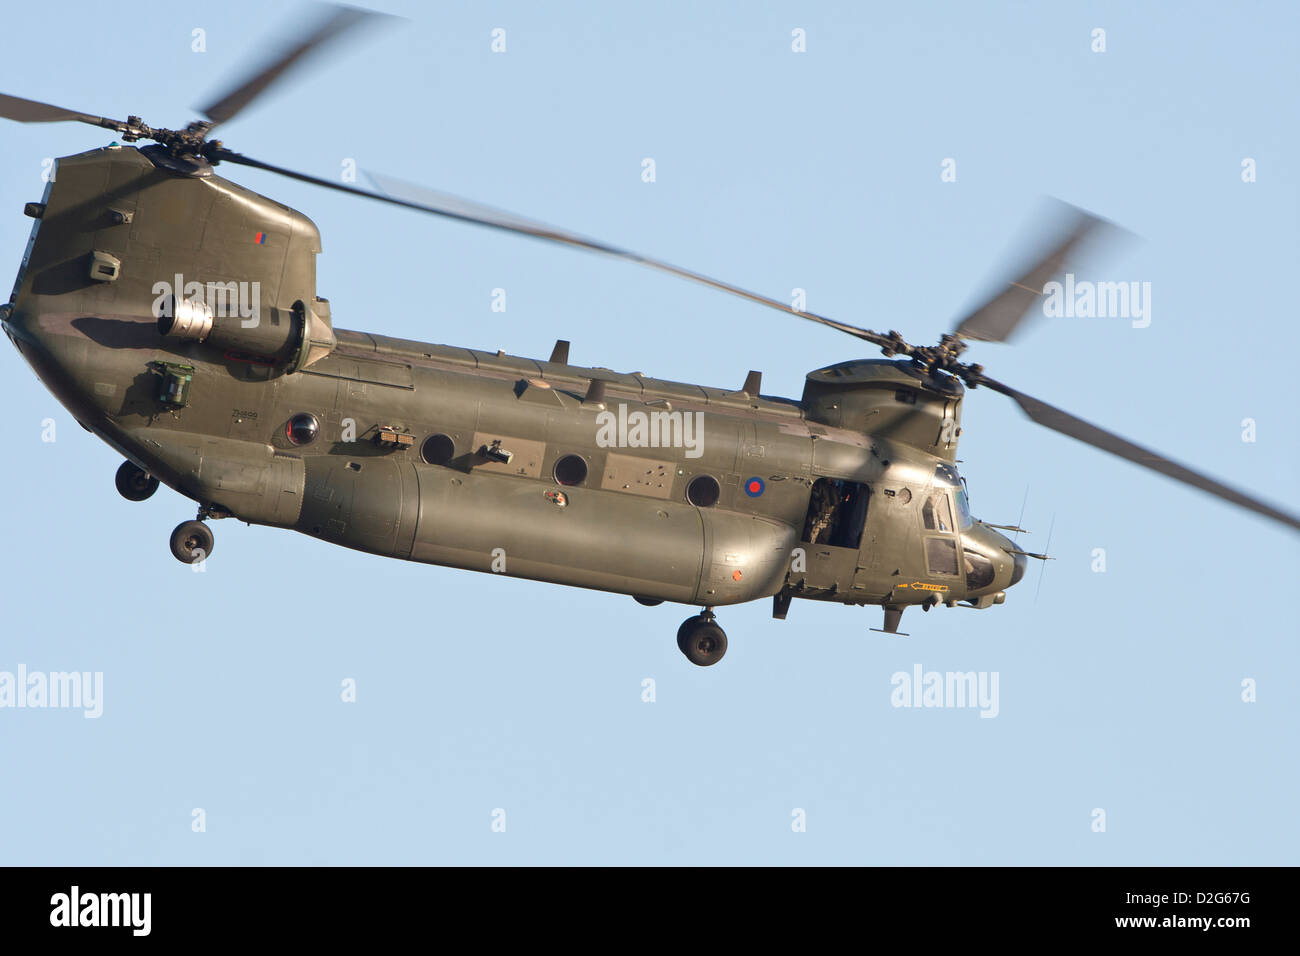 A military Chinook helicopter in flight Stock Photo